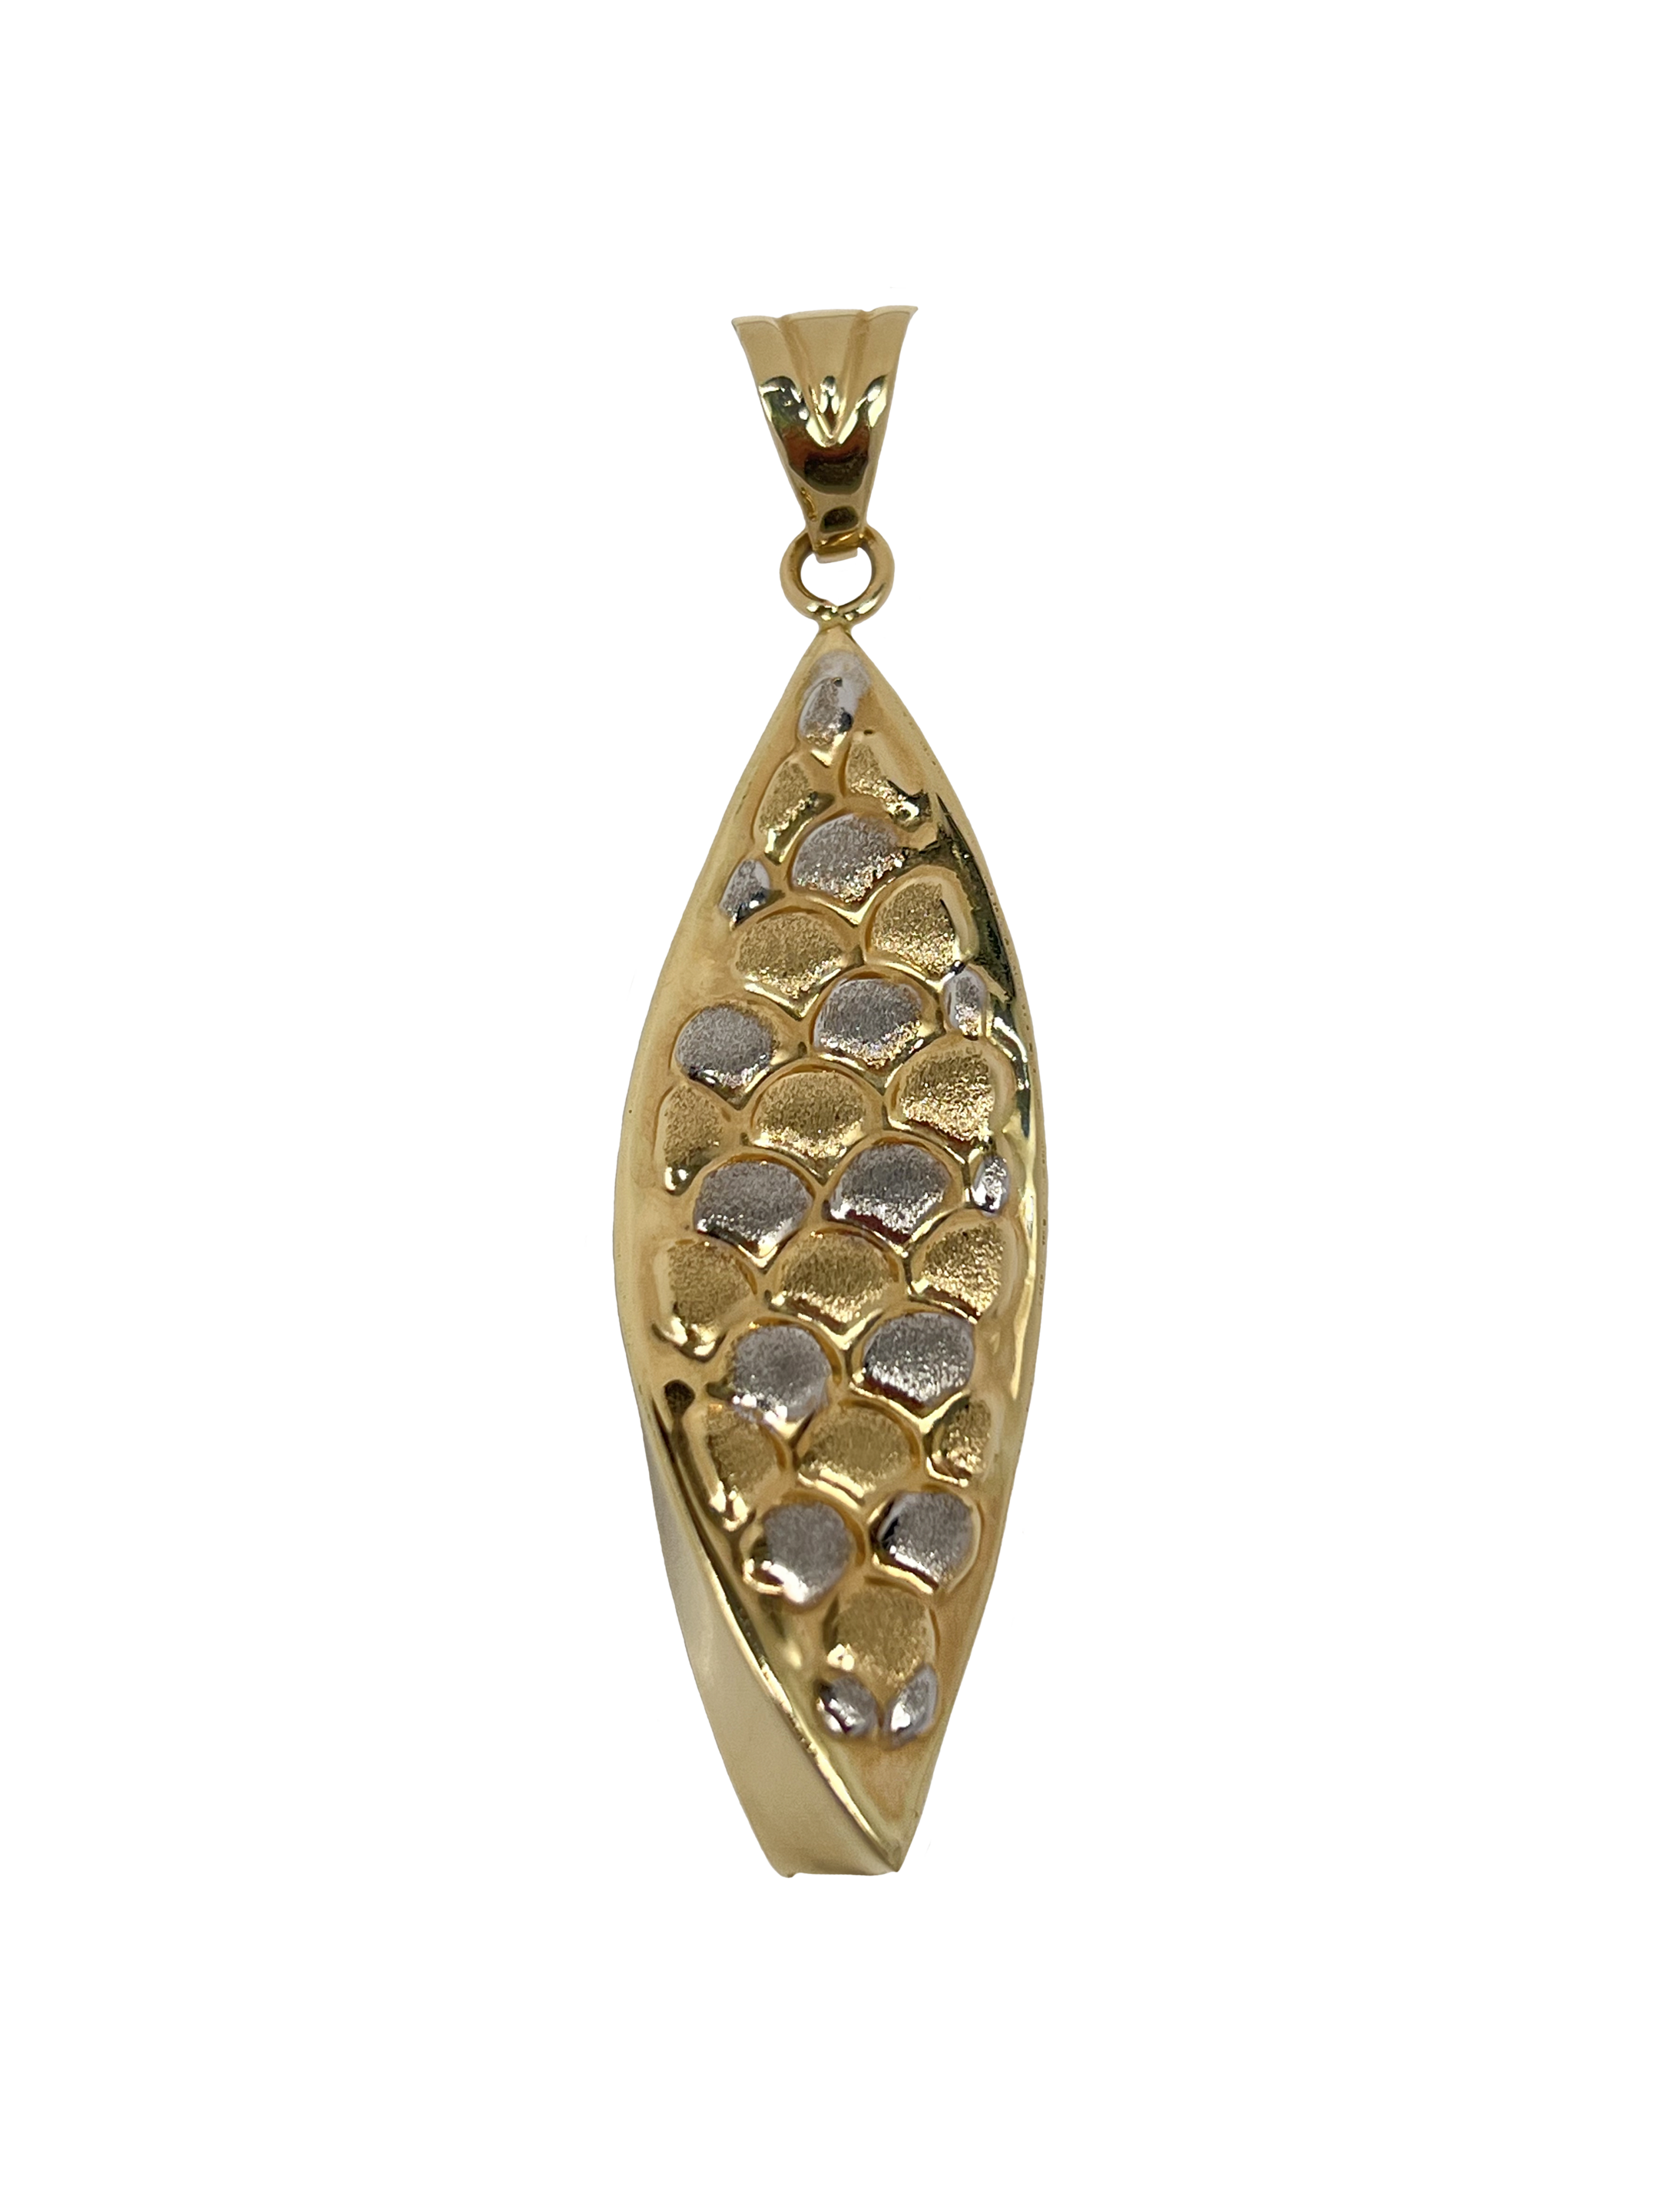 Gold pendant combined with patterns and sandblasting